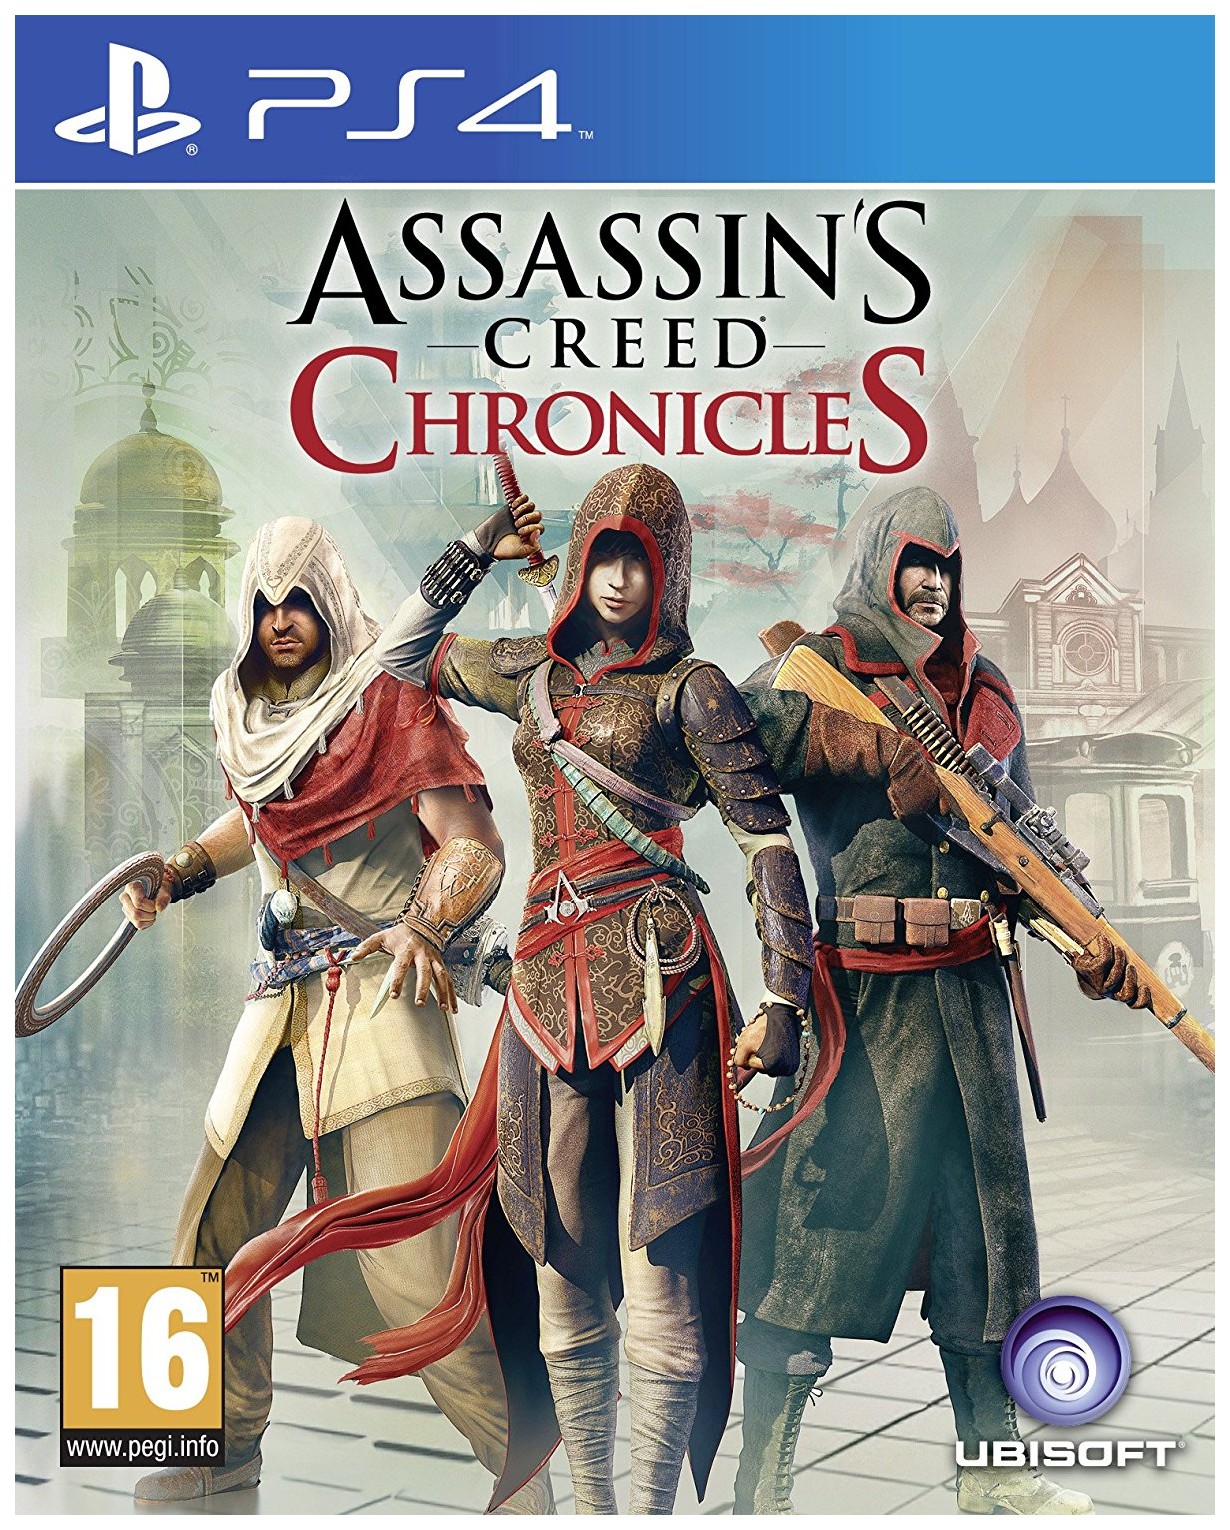 Assassins creed chronicles trilogy steam фото 81